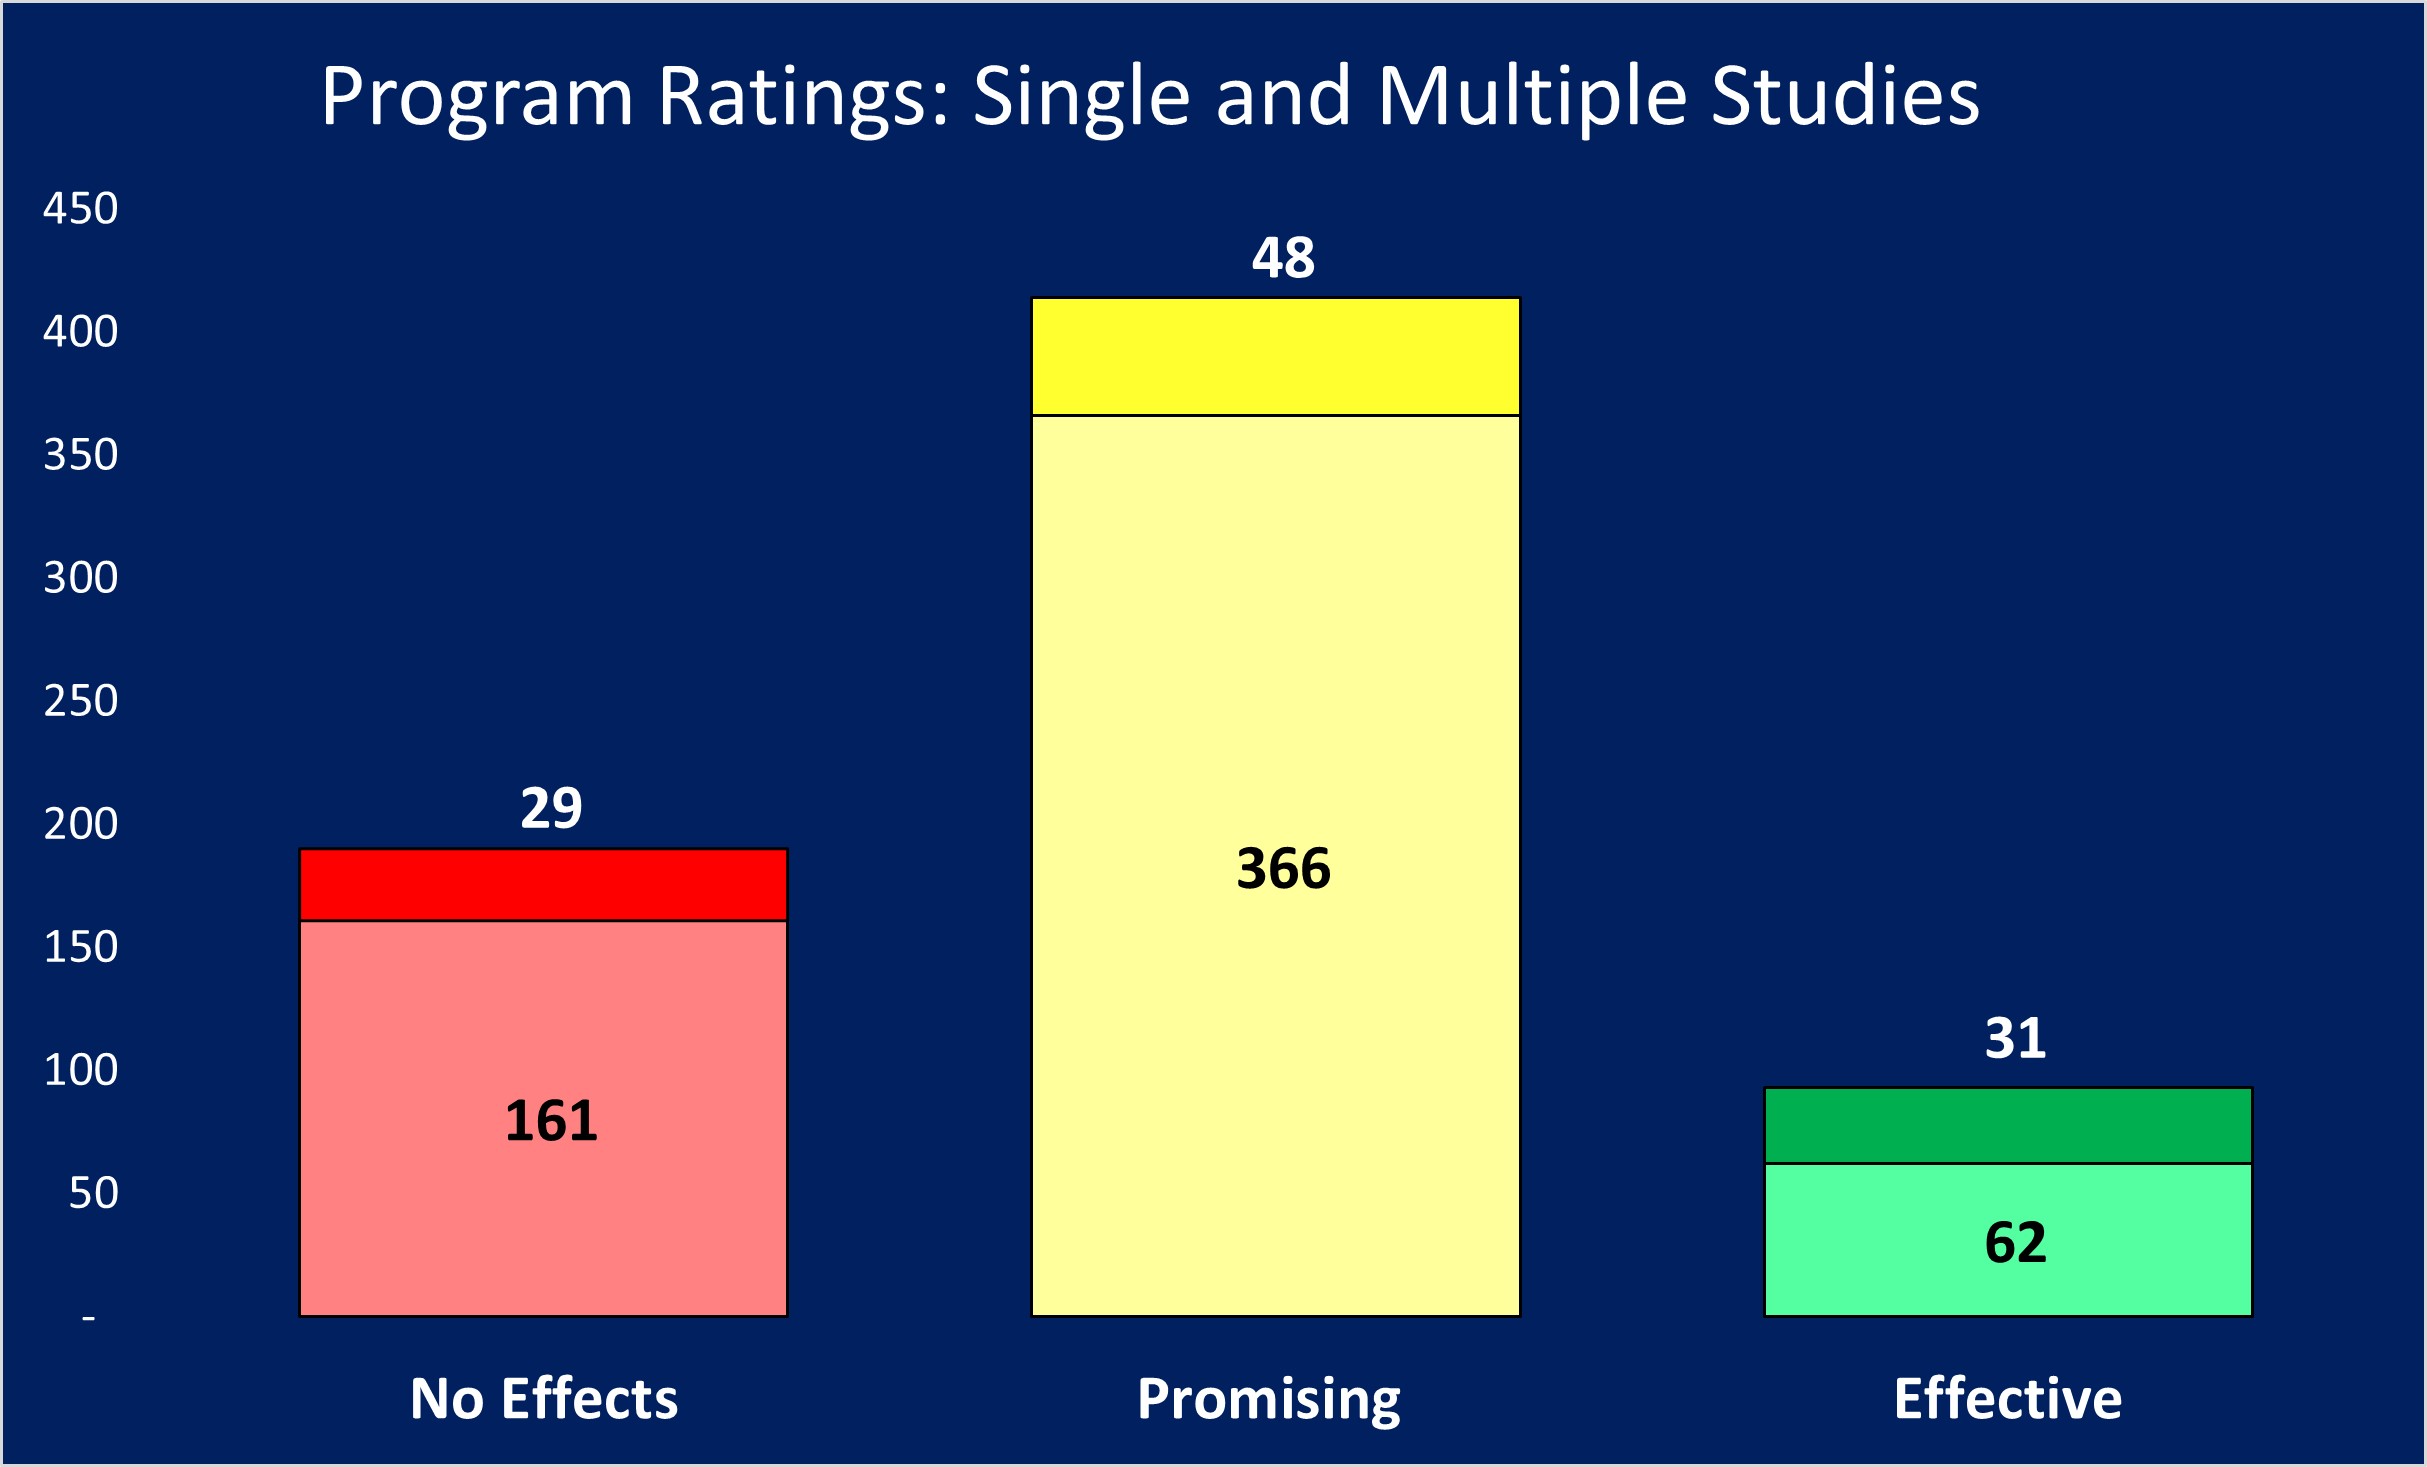 Program Ratings by Rating and Number of Studies (Single and Multiple)